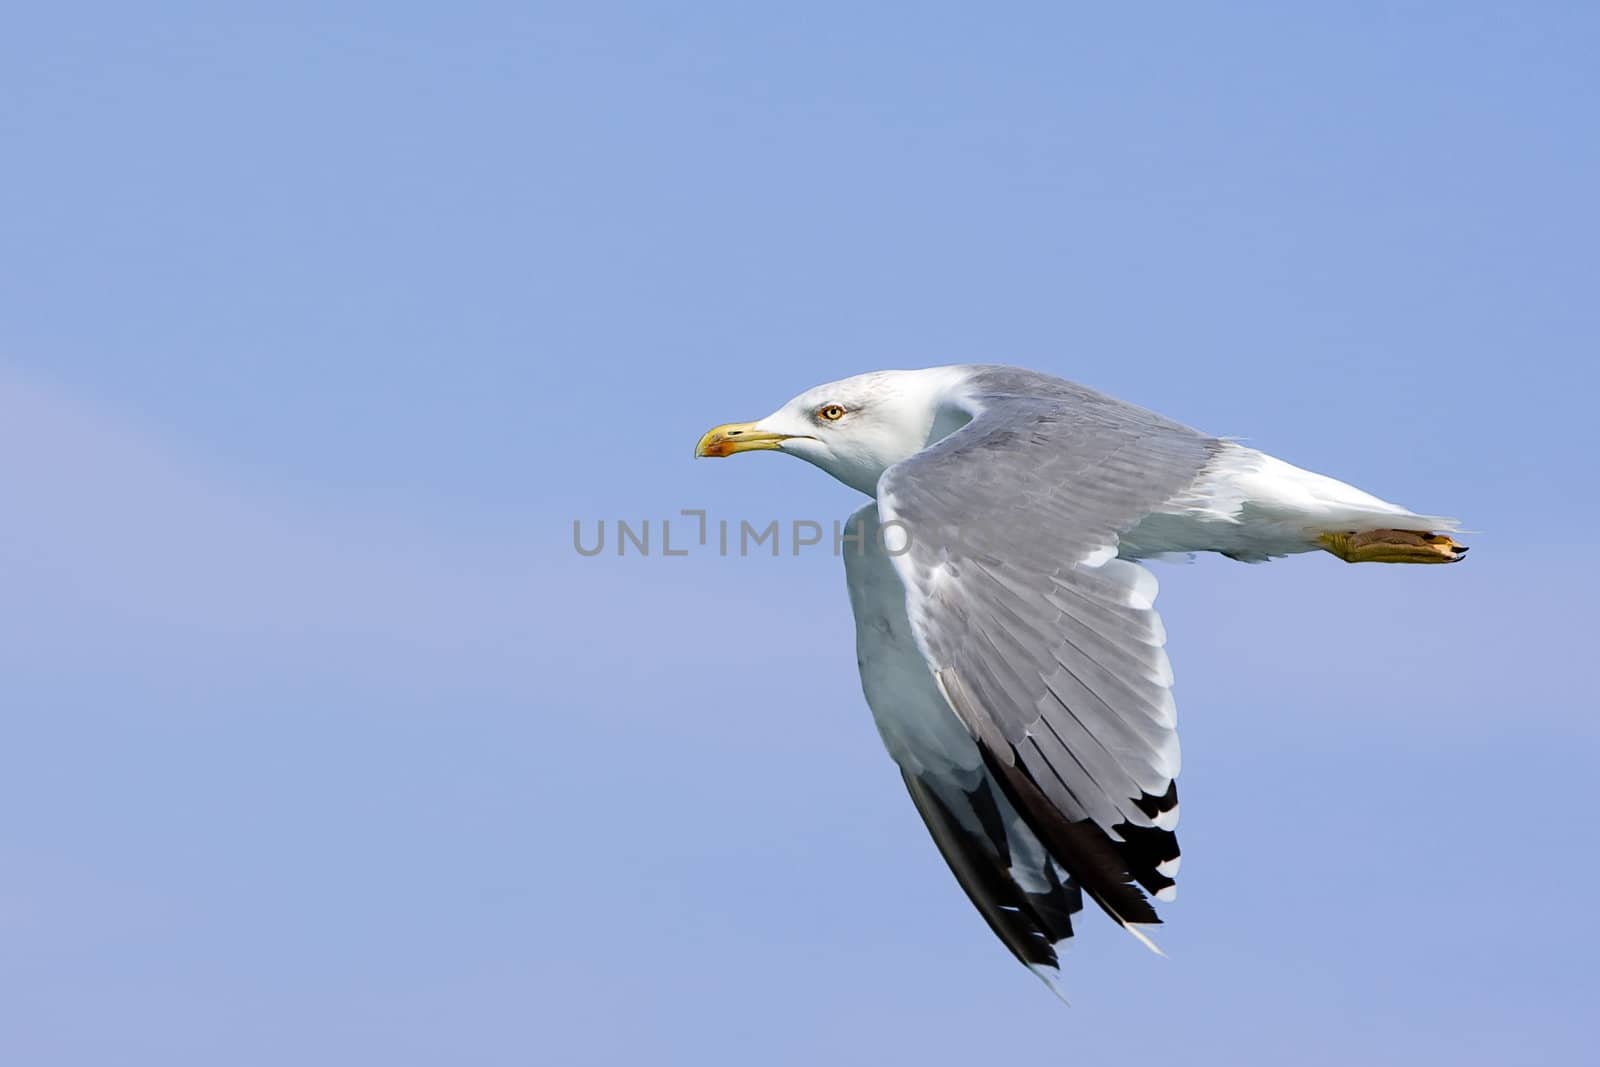 Flaying seagull over light blue sky